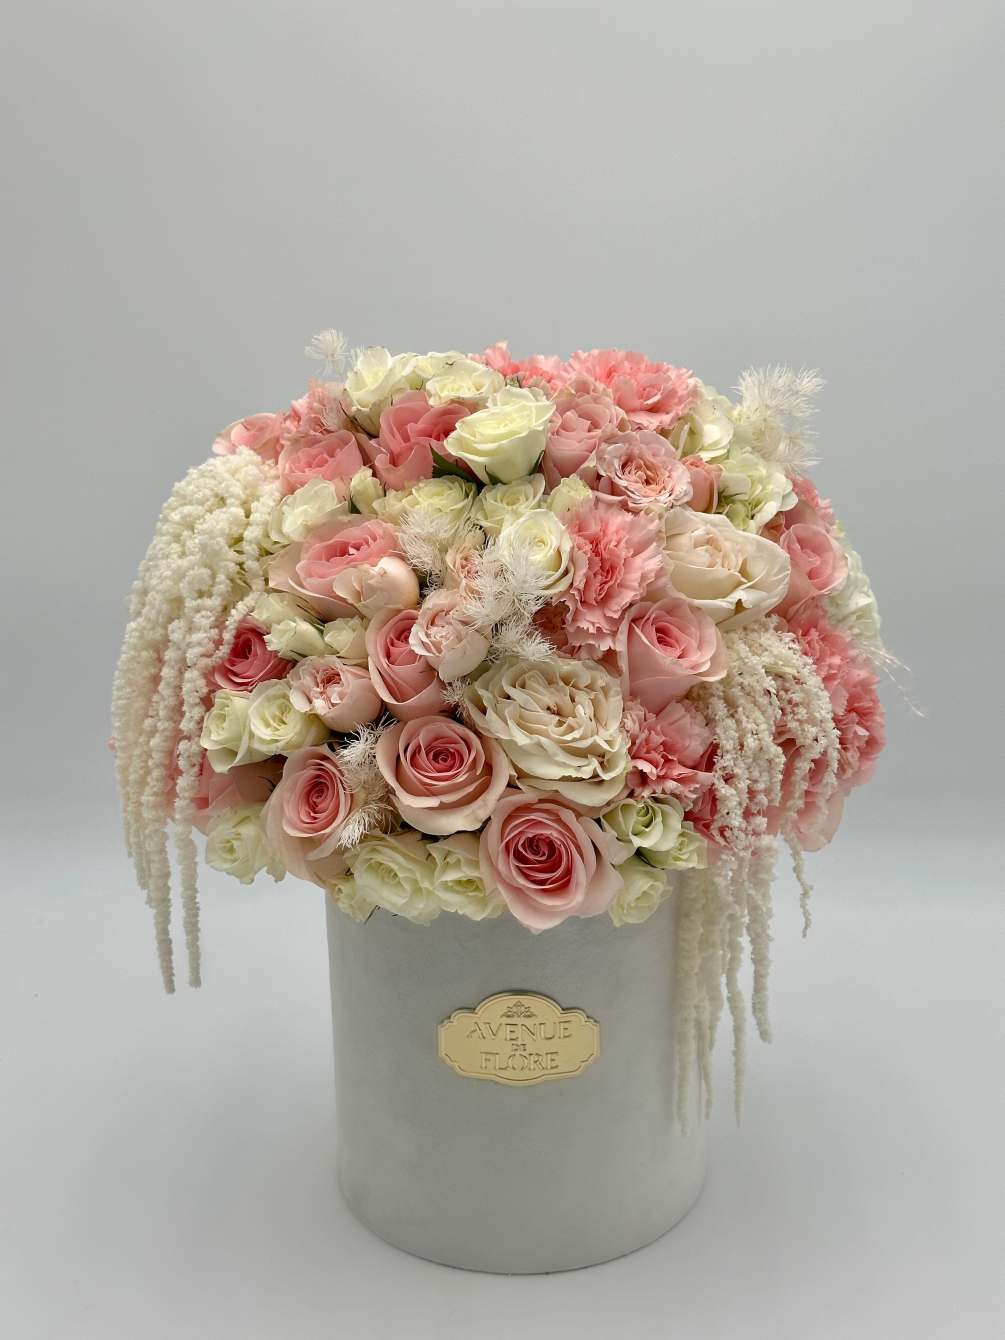 Step into a realm of enchantment with our Pink Dreamland arrangement, where